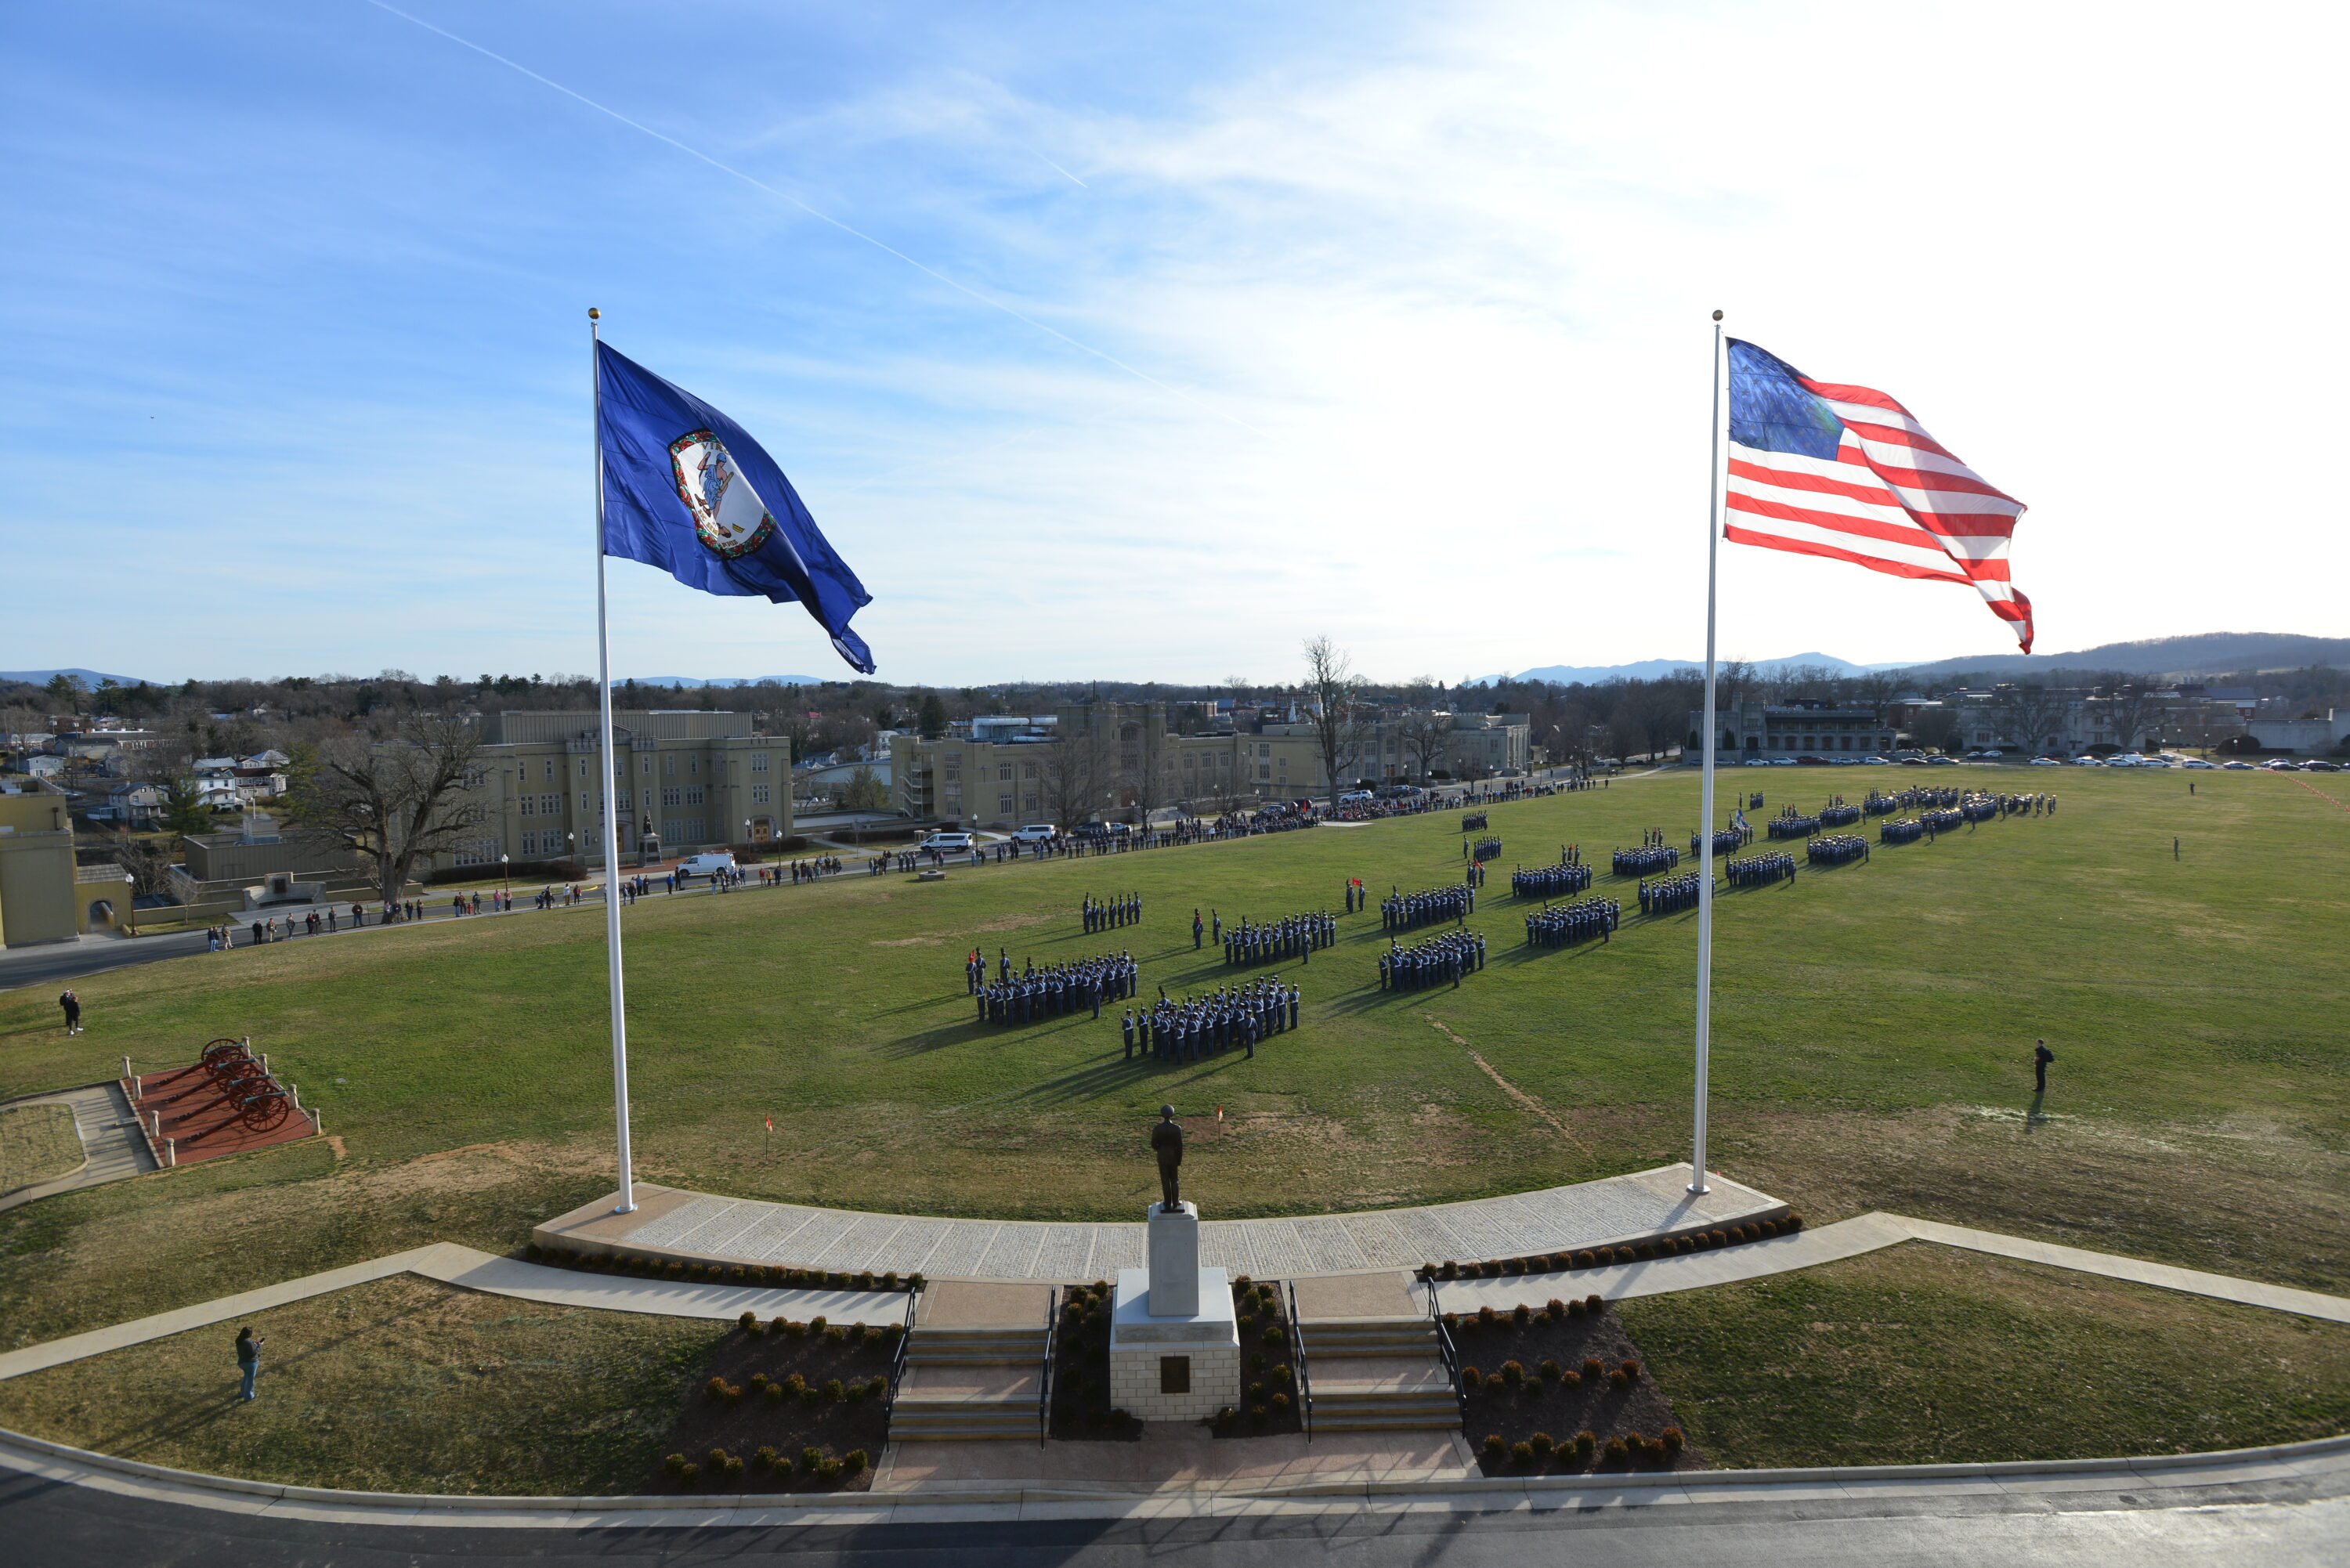 aerial shot of cadets in formation on parade ground, and flags/Marshall statue